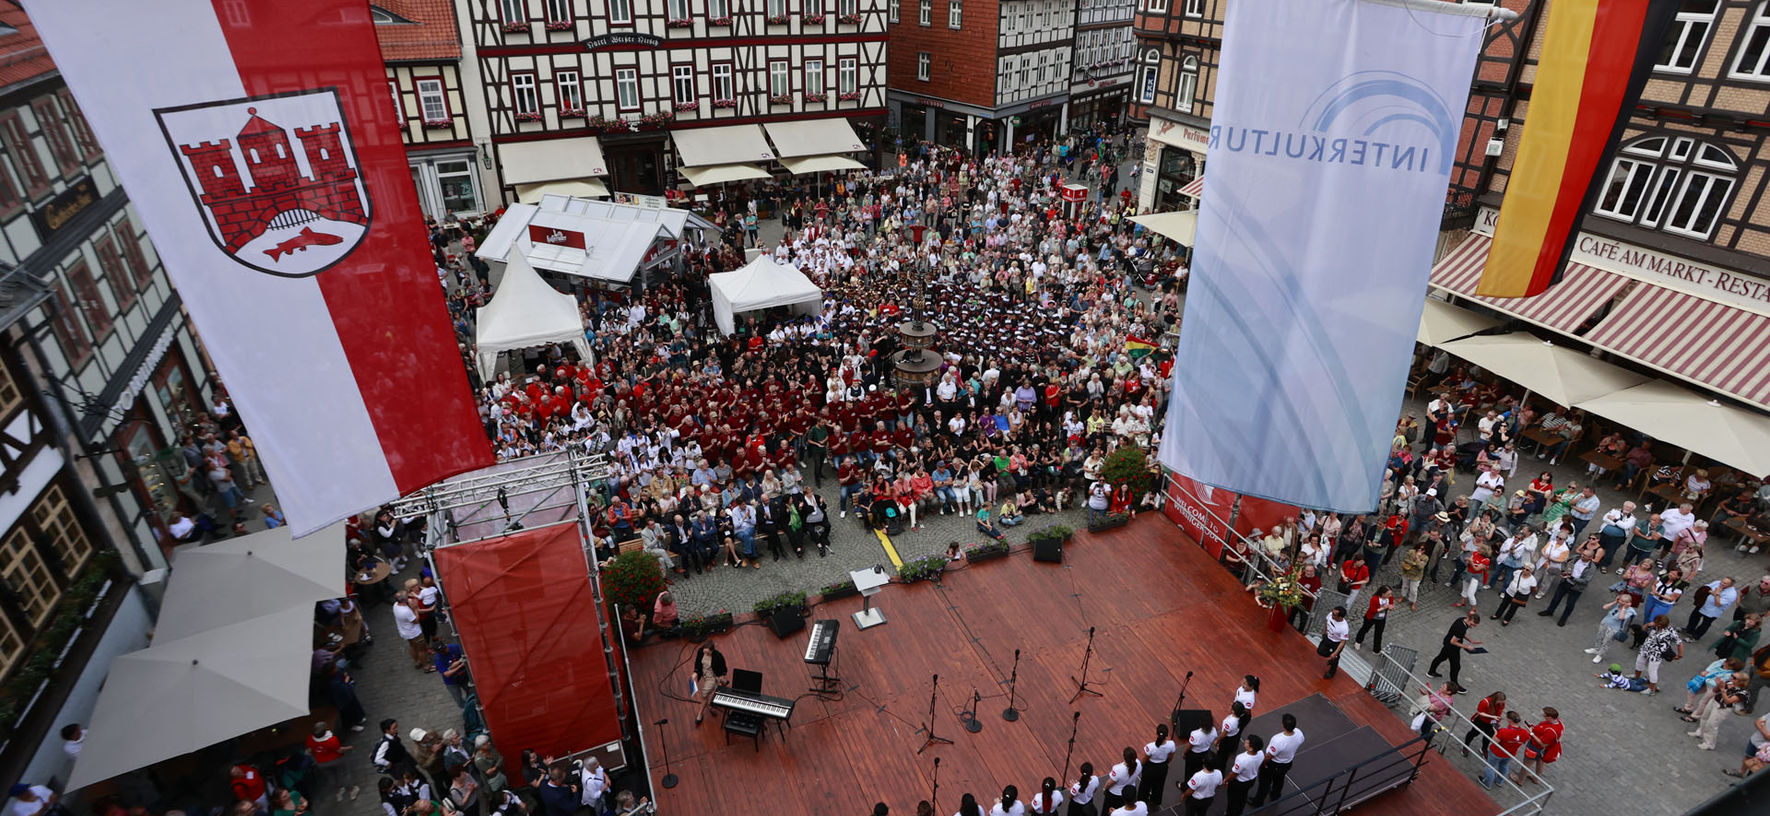 Opening event on the Market Square in Wernigerode © Mathias Bein